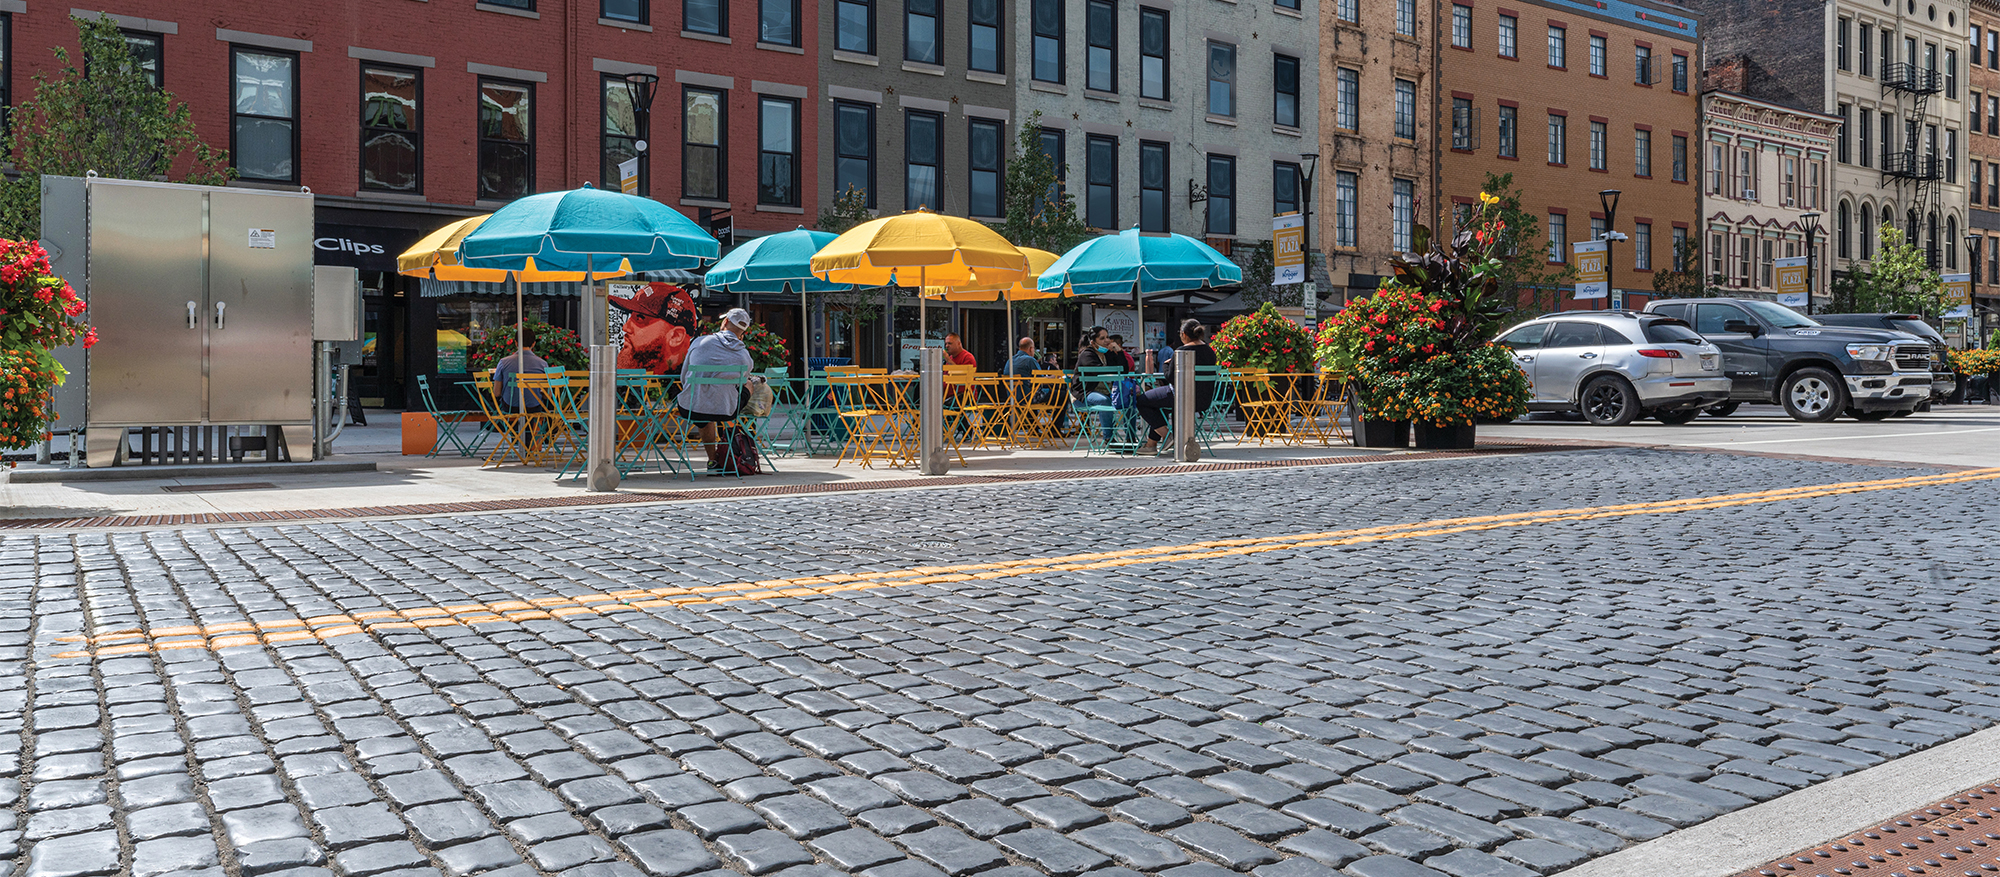 Visitors lounge street side in colorful tables and chairs, next to the main roadway that features Courtstone pavers in a deep blue hue.